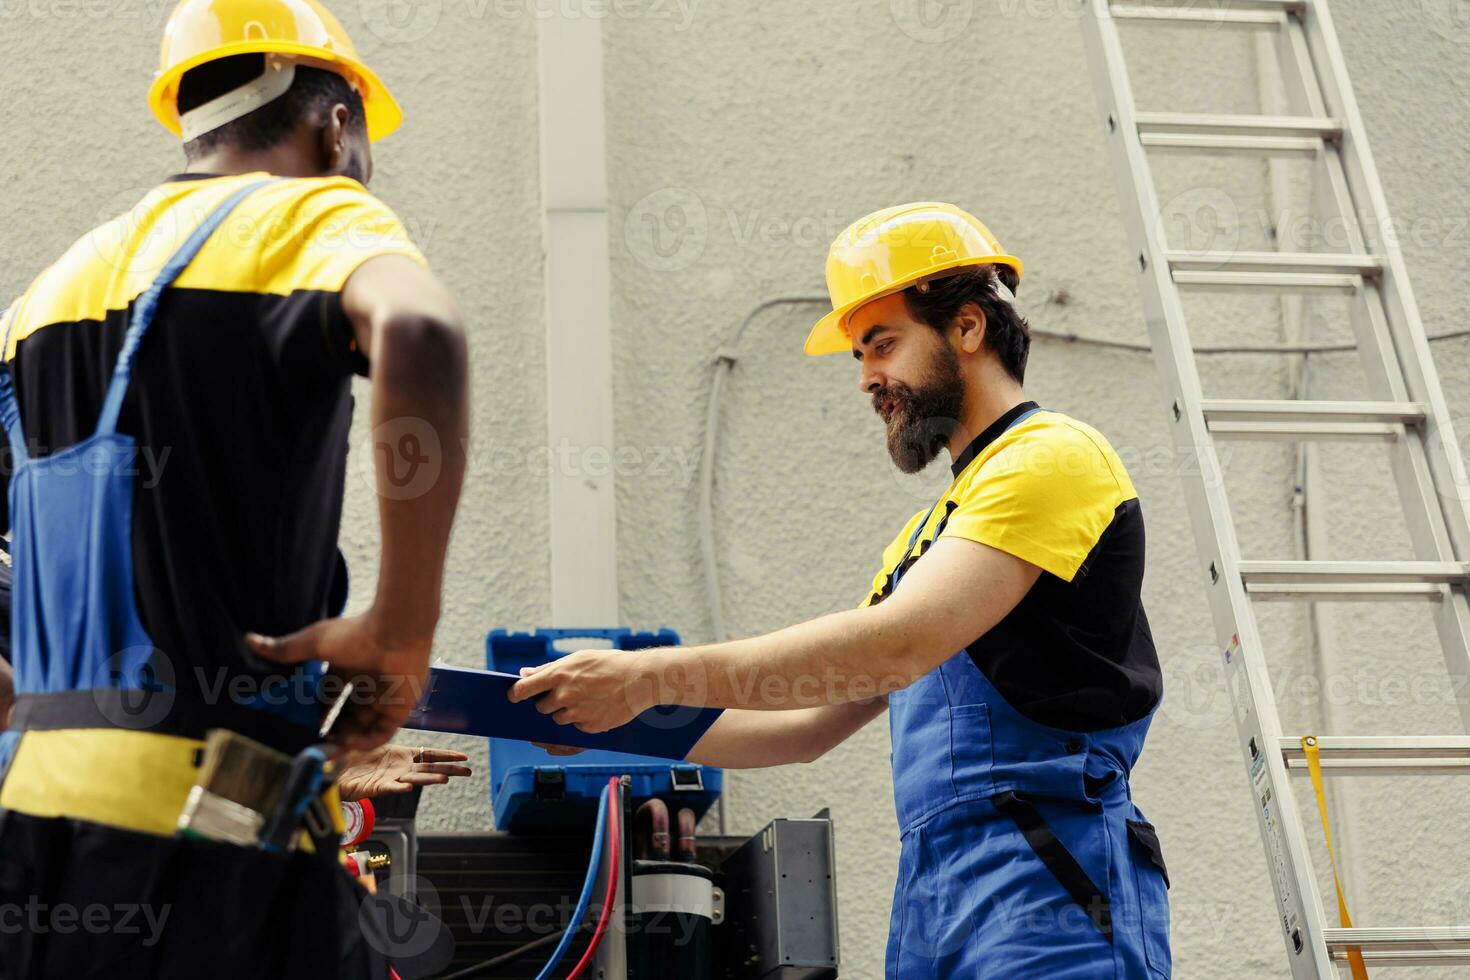 Precise servicemen repairing and maintaining heating, ventilation, and air conditioning systems. Experienced professionals commissioned for condenser annual checkup, writing report on clipboard photo